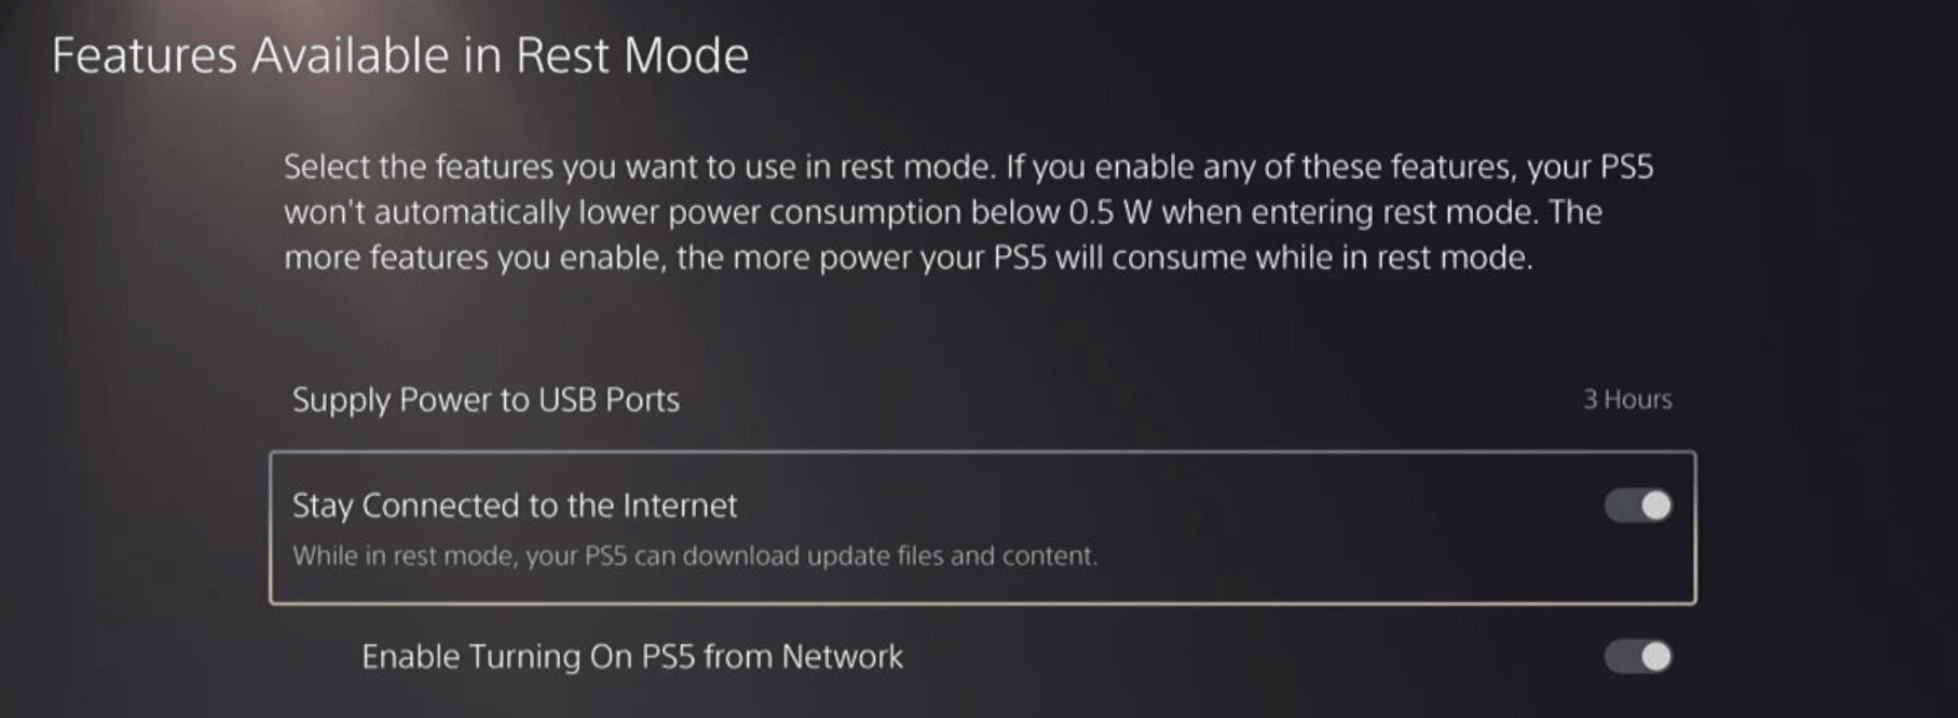 Stay Connected to the Internet is toggled in PS5 rest mode settings menu to enable automatic updates of Battlefield 2042